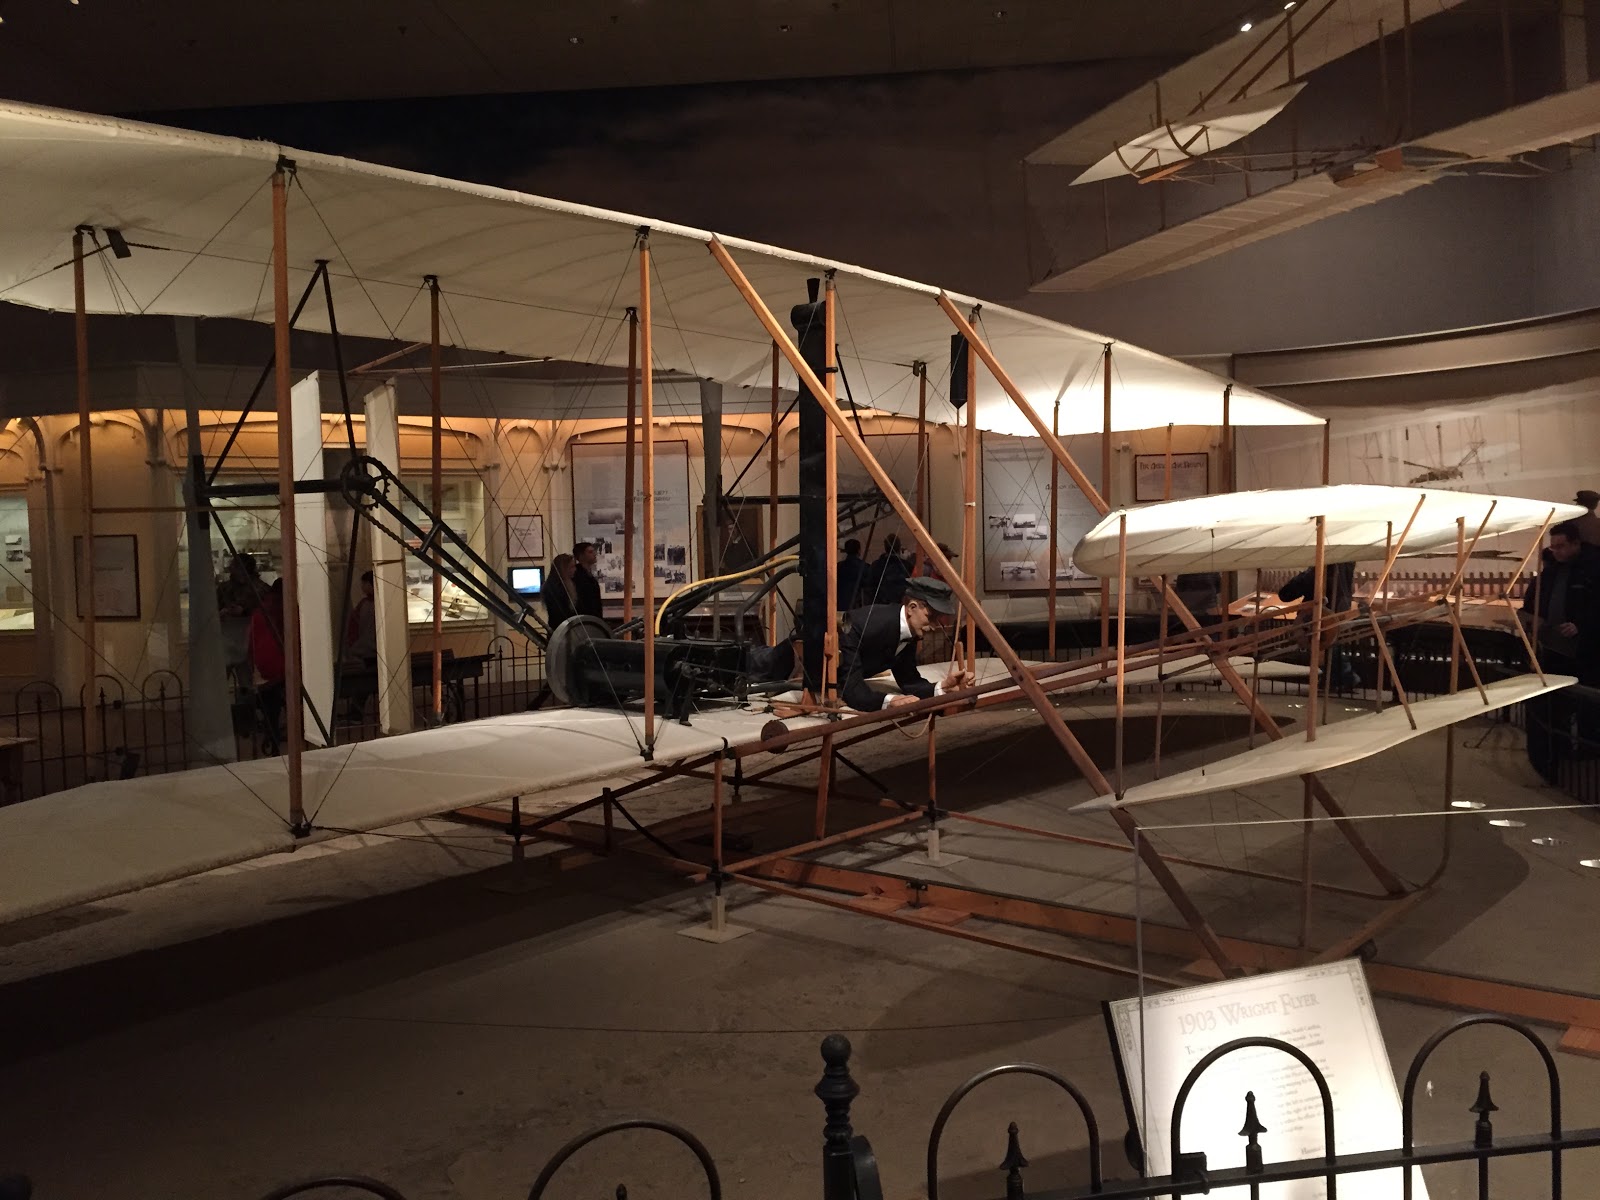 wright flyer 1903 in museum